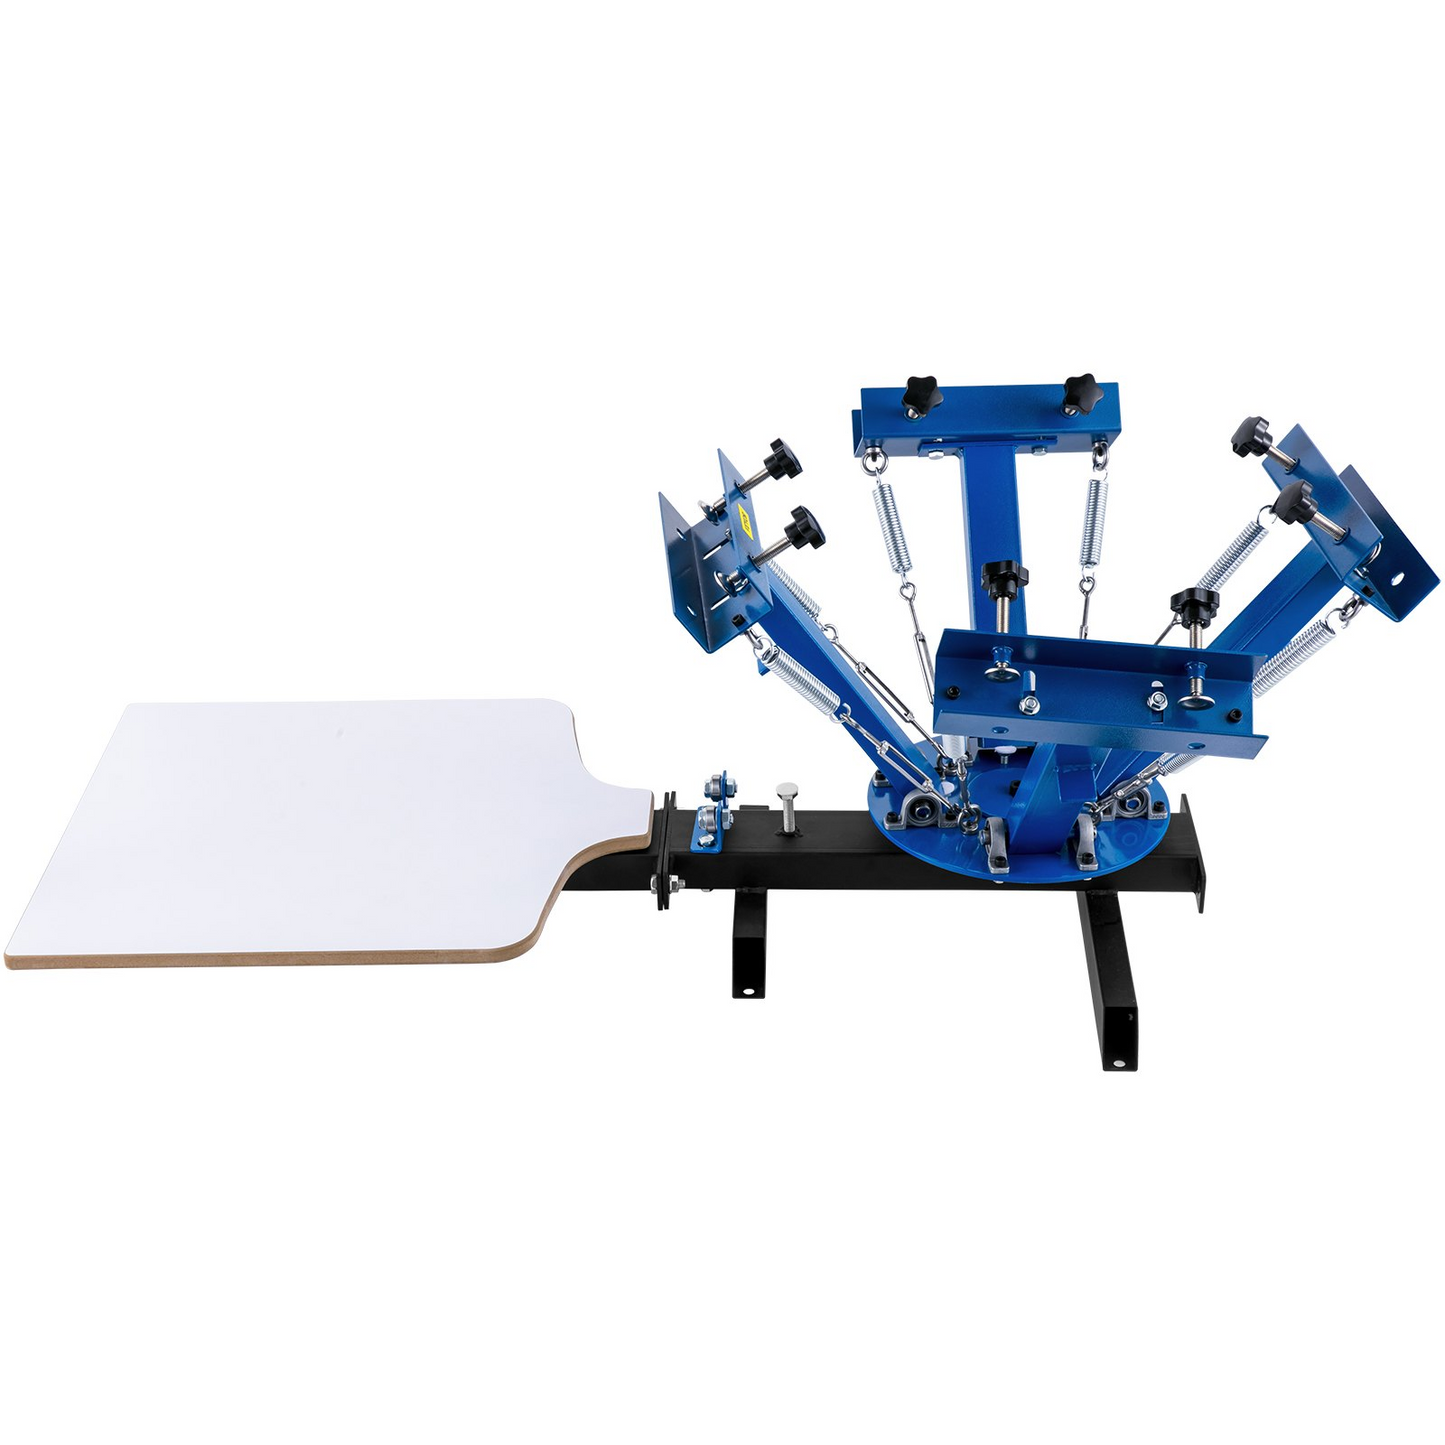 VEVOR Screen Printing Machine, 4 Color 1 Station Screen Printing Press, 21.7 x 17.7 inch Silk Screen Printing DIY T-Shirts Removable Pallet, Goodies N Stuff